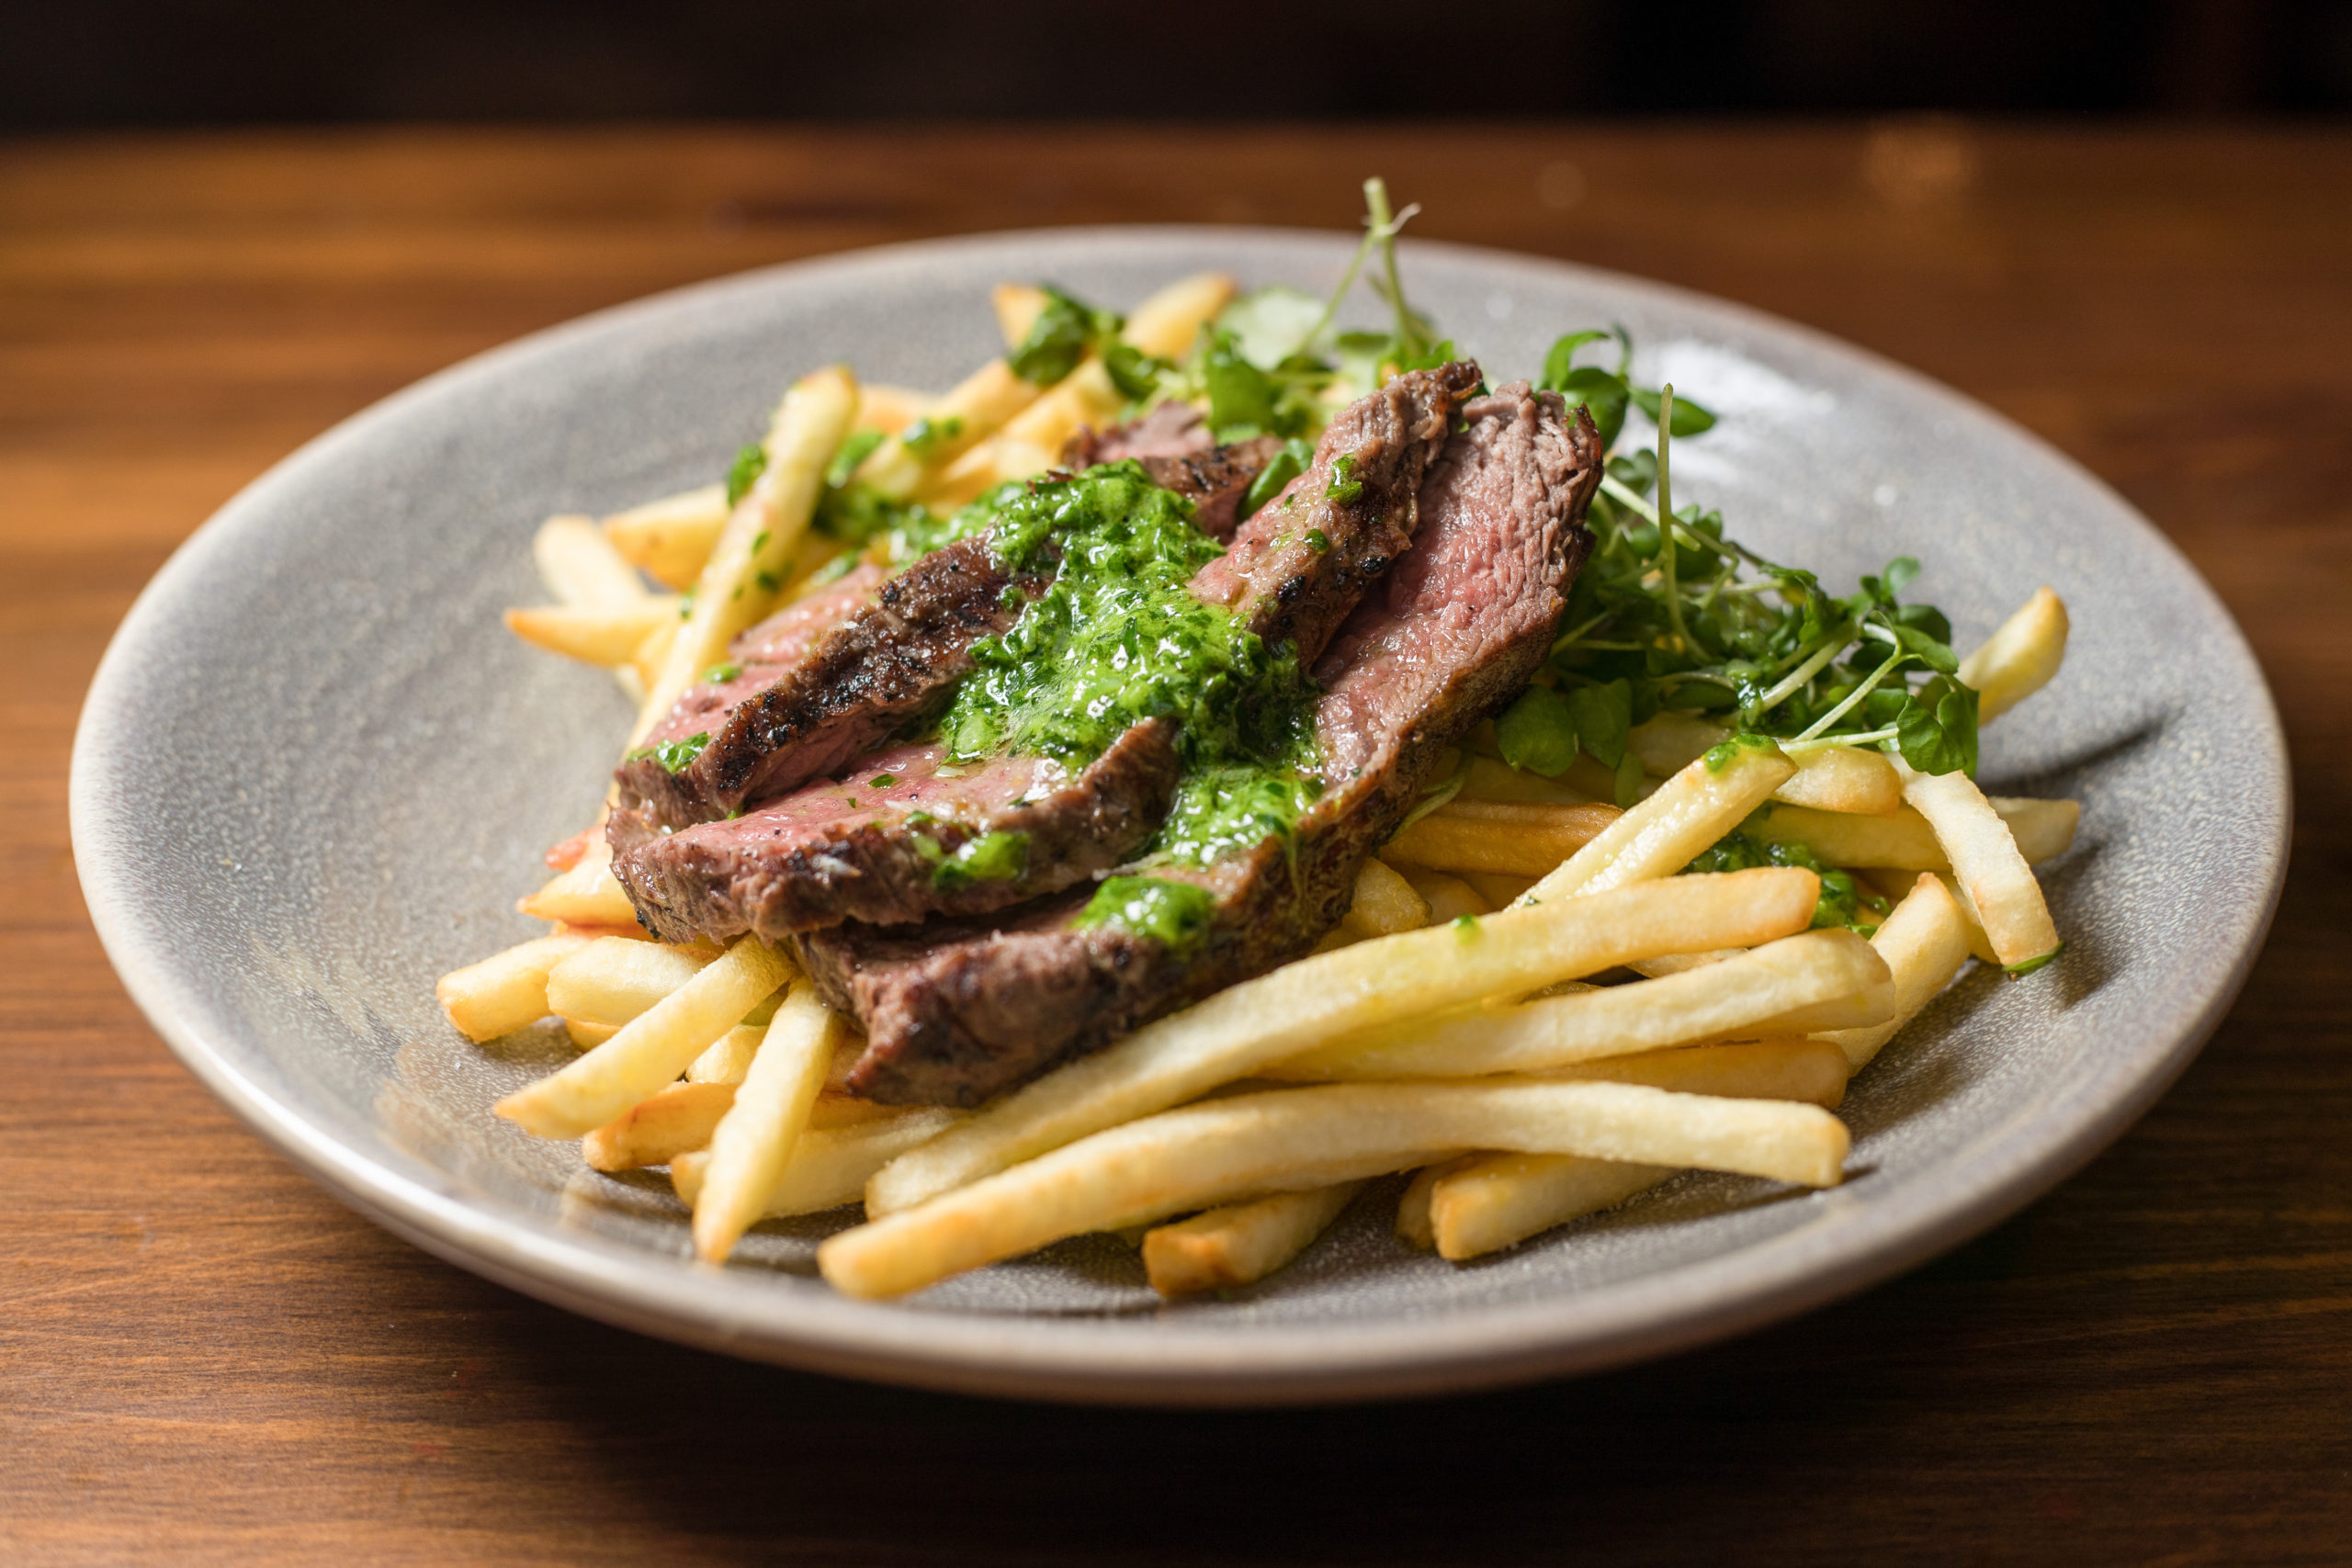 Steak and chips with salsa verde